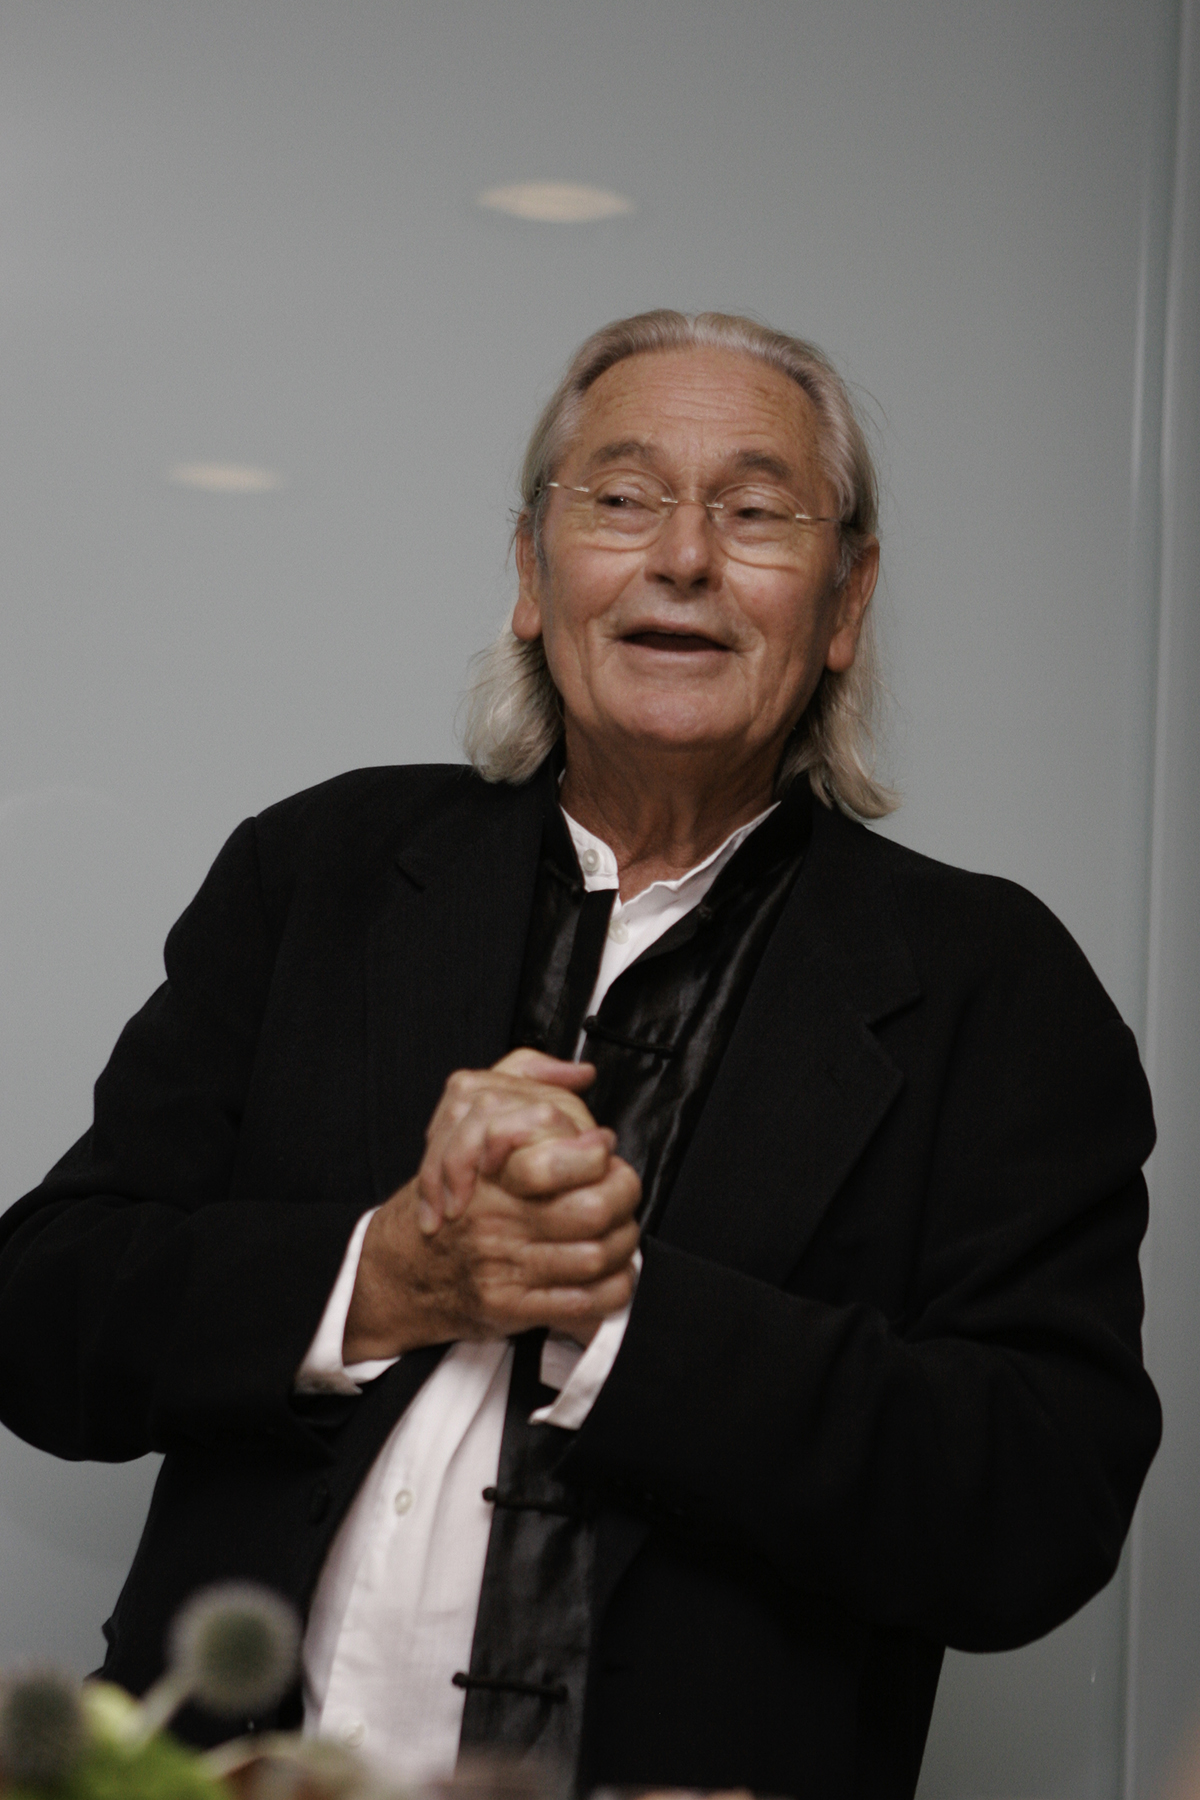 Ingo smiles widely and clasps his hands in delight. He is an older white gentleman with shoulder-length silver hair. He is wearing a black jacket and a white button-up shirt.